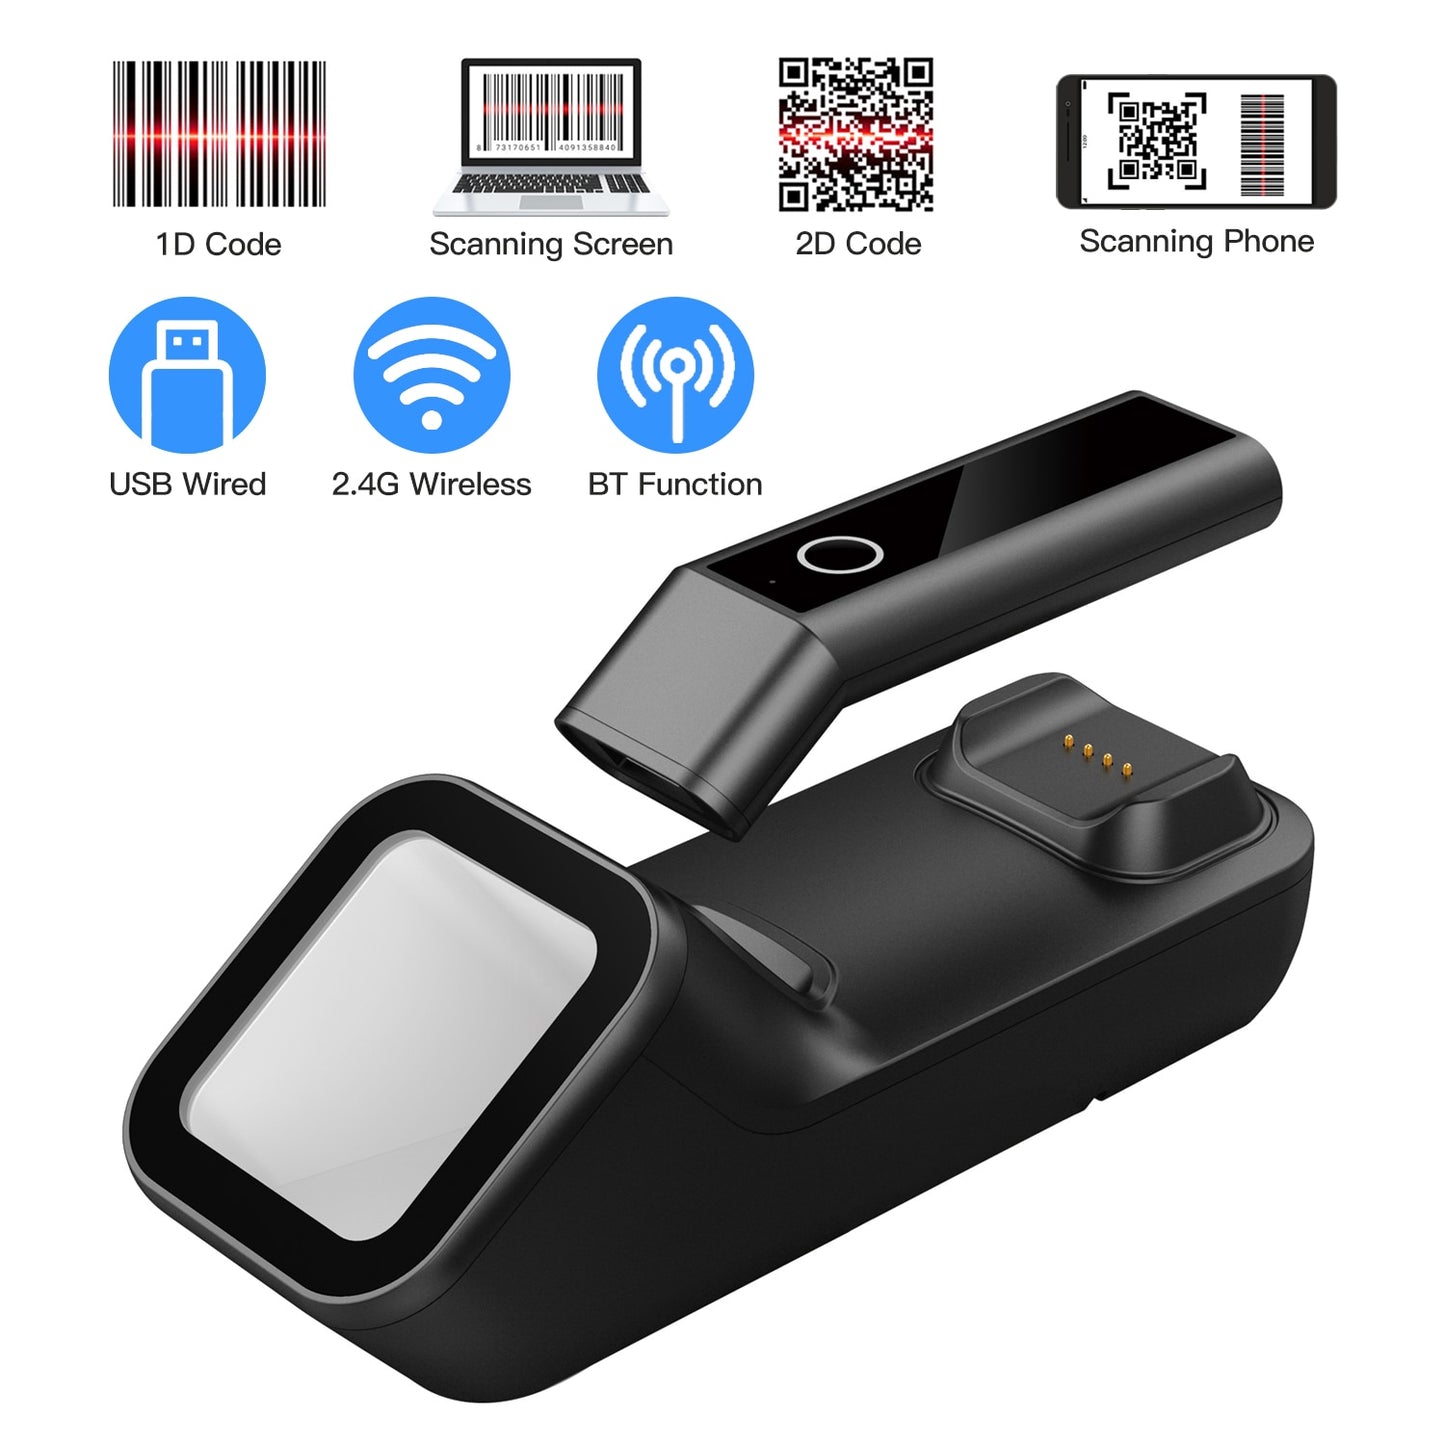 3-in-1 Barcode Scanner Handheld 1D/2D/QR Bar Code Reader BT & 2.4G Wireless & USB Wired Connection with Charging Scanning